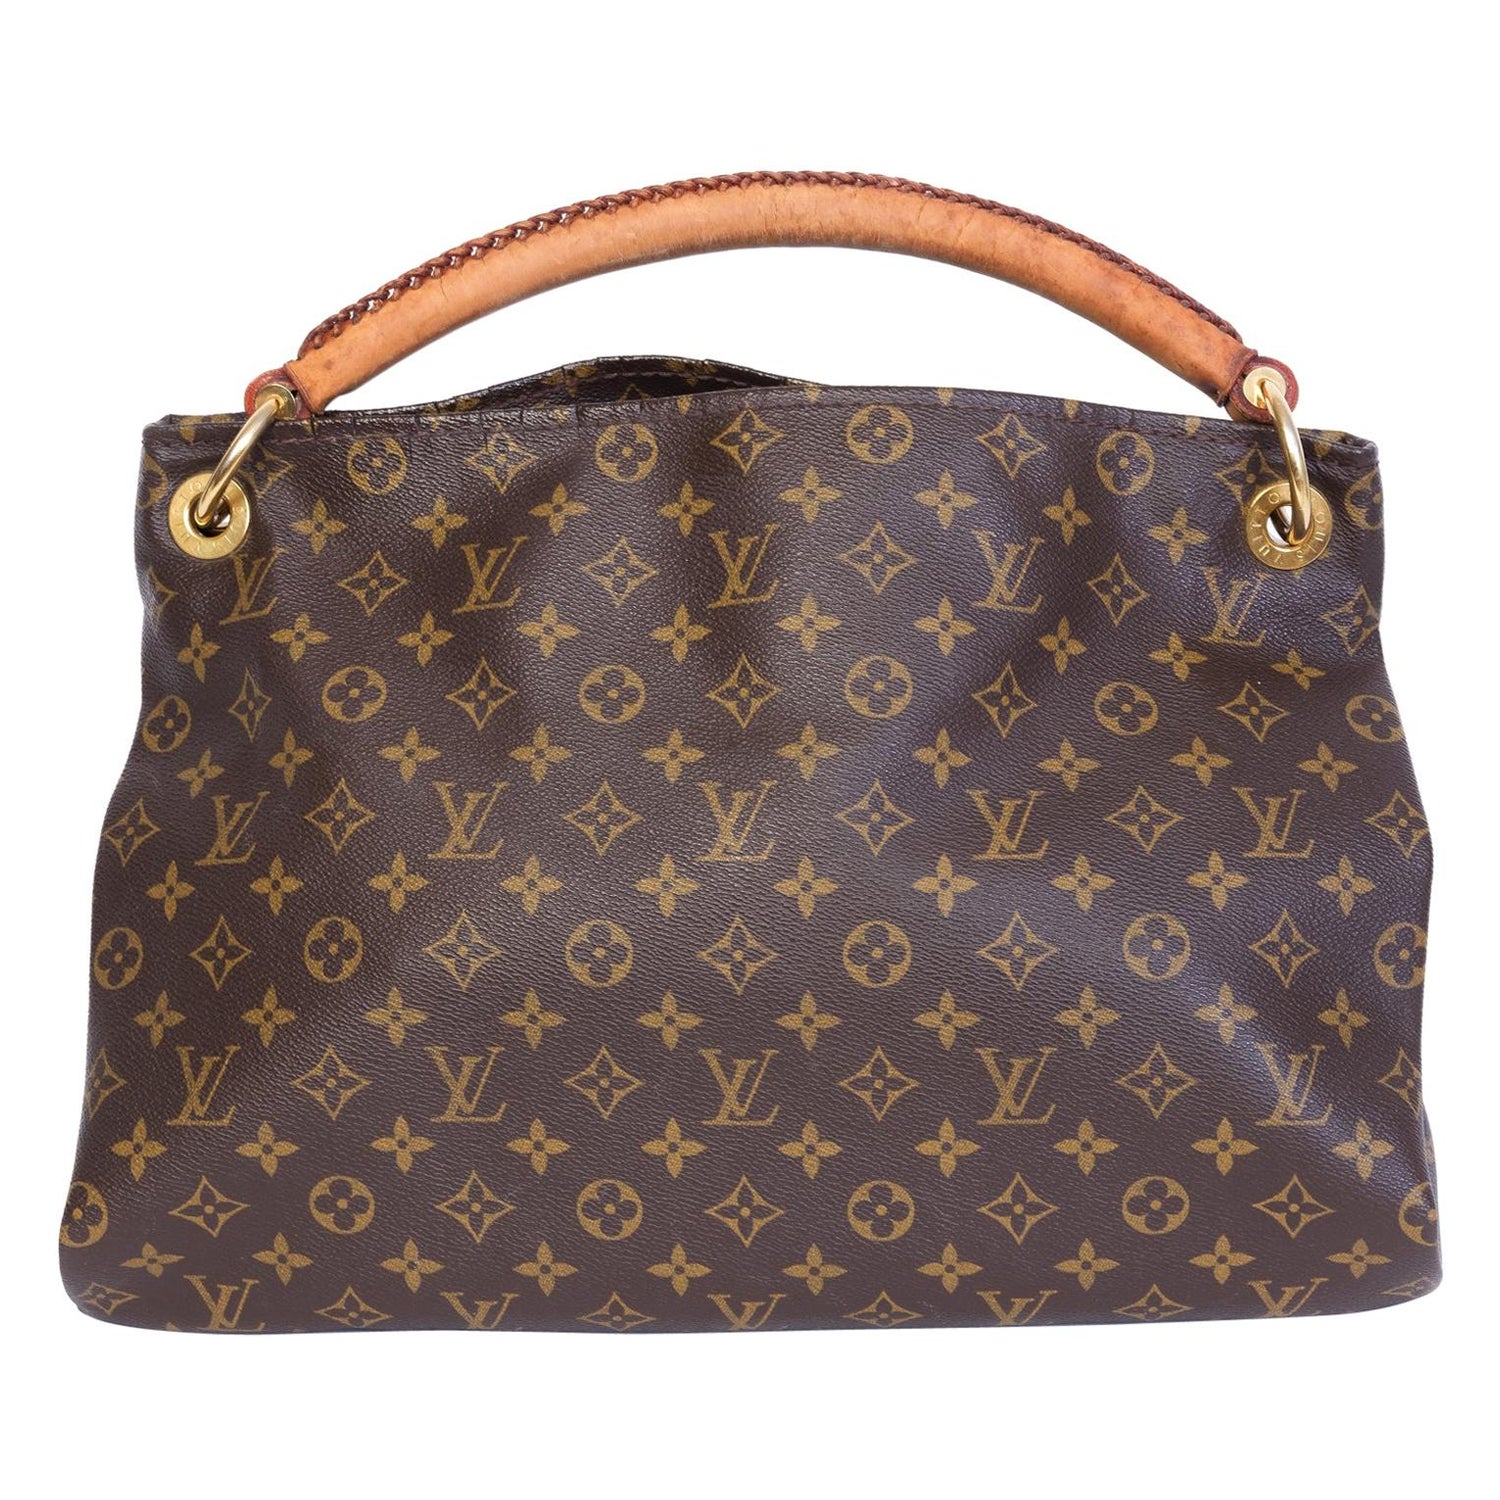 Handbagholic - Can you spot the FAKE ❌Louis Vuitton Artsy bag? Watch our  comparison video and become a pro at spotting fake Artsy bags on  >   🤜 And see our